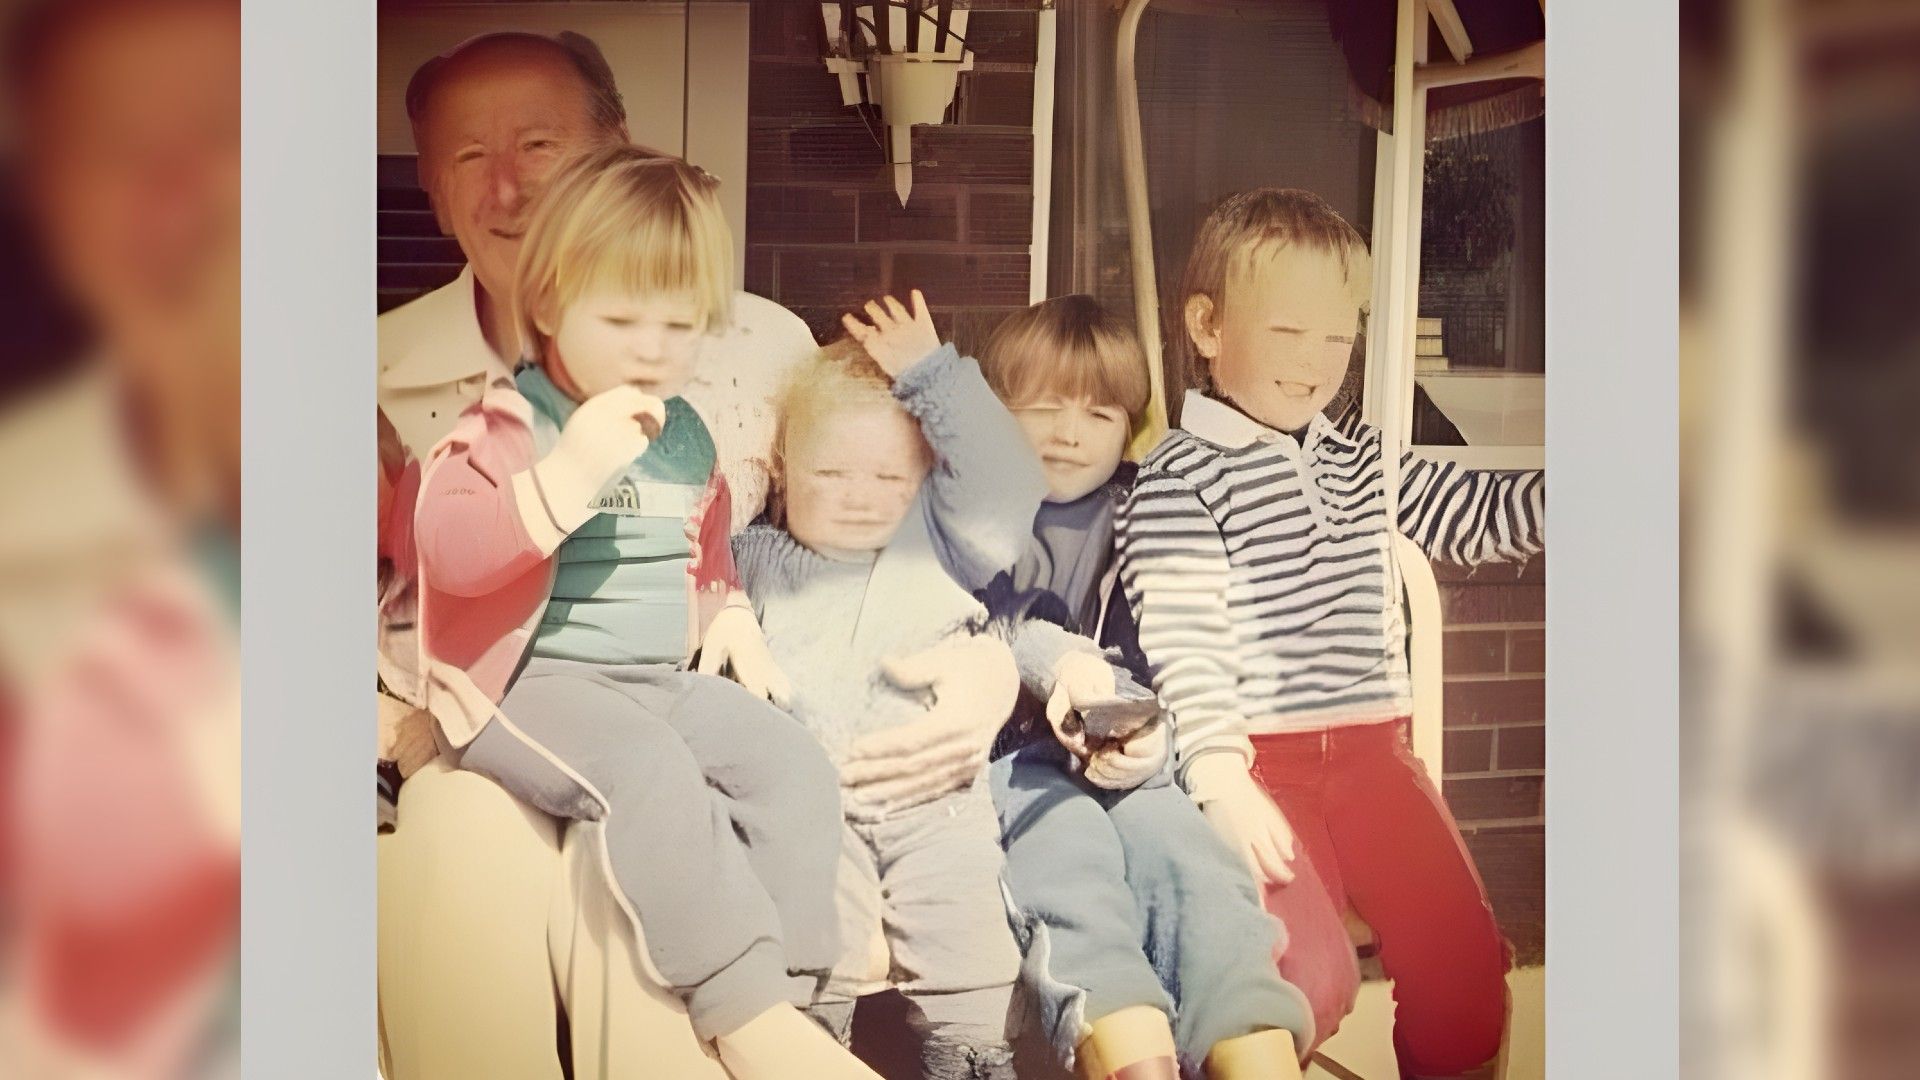 Liam Hemsworth with his brothers in childhood (Liam is in the red jacket)